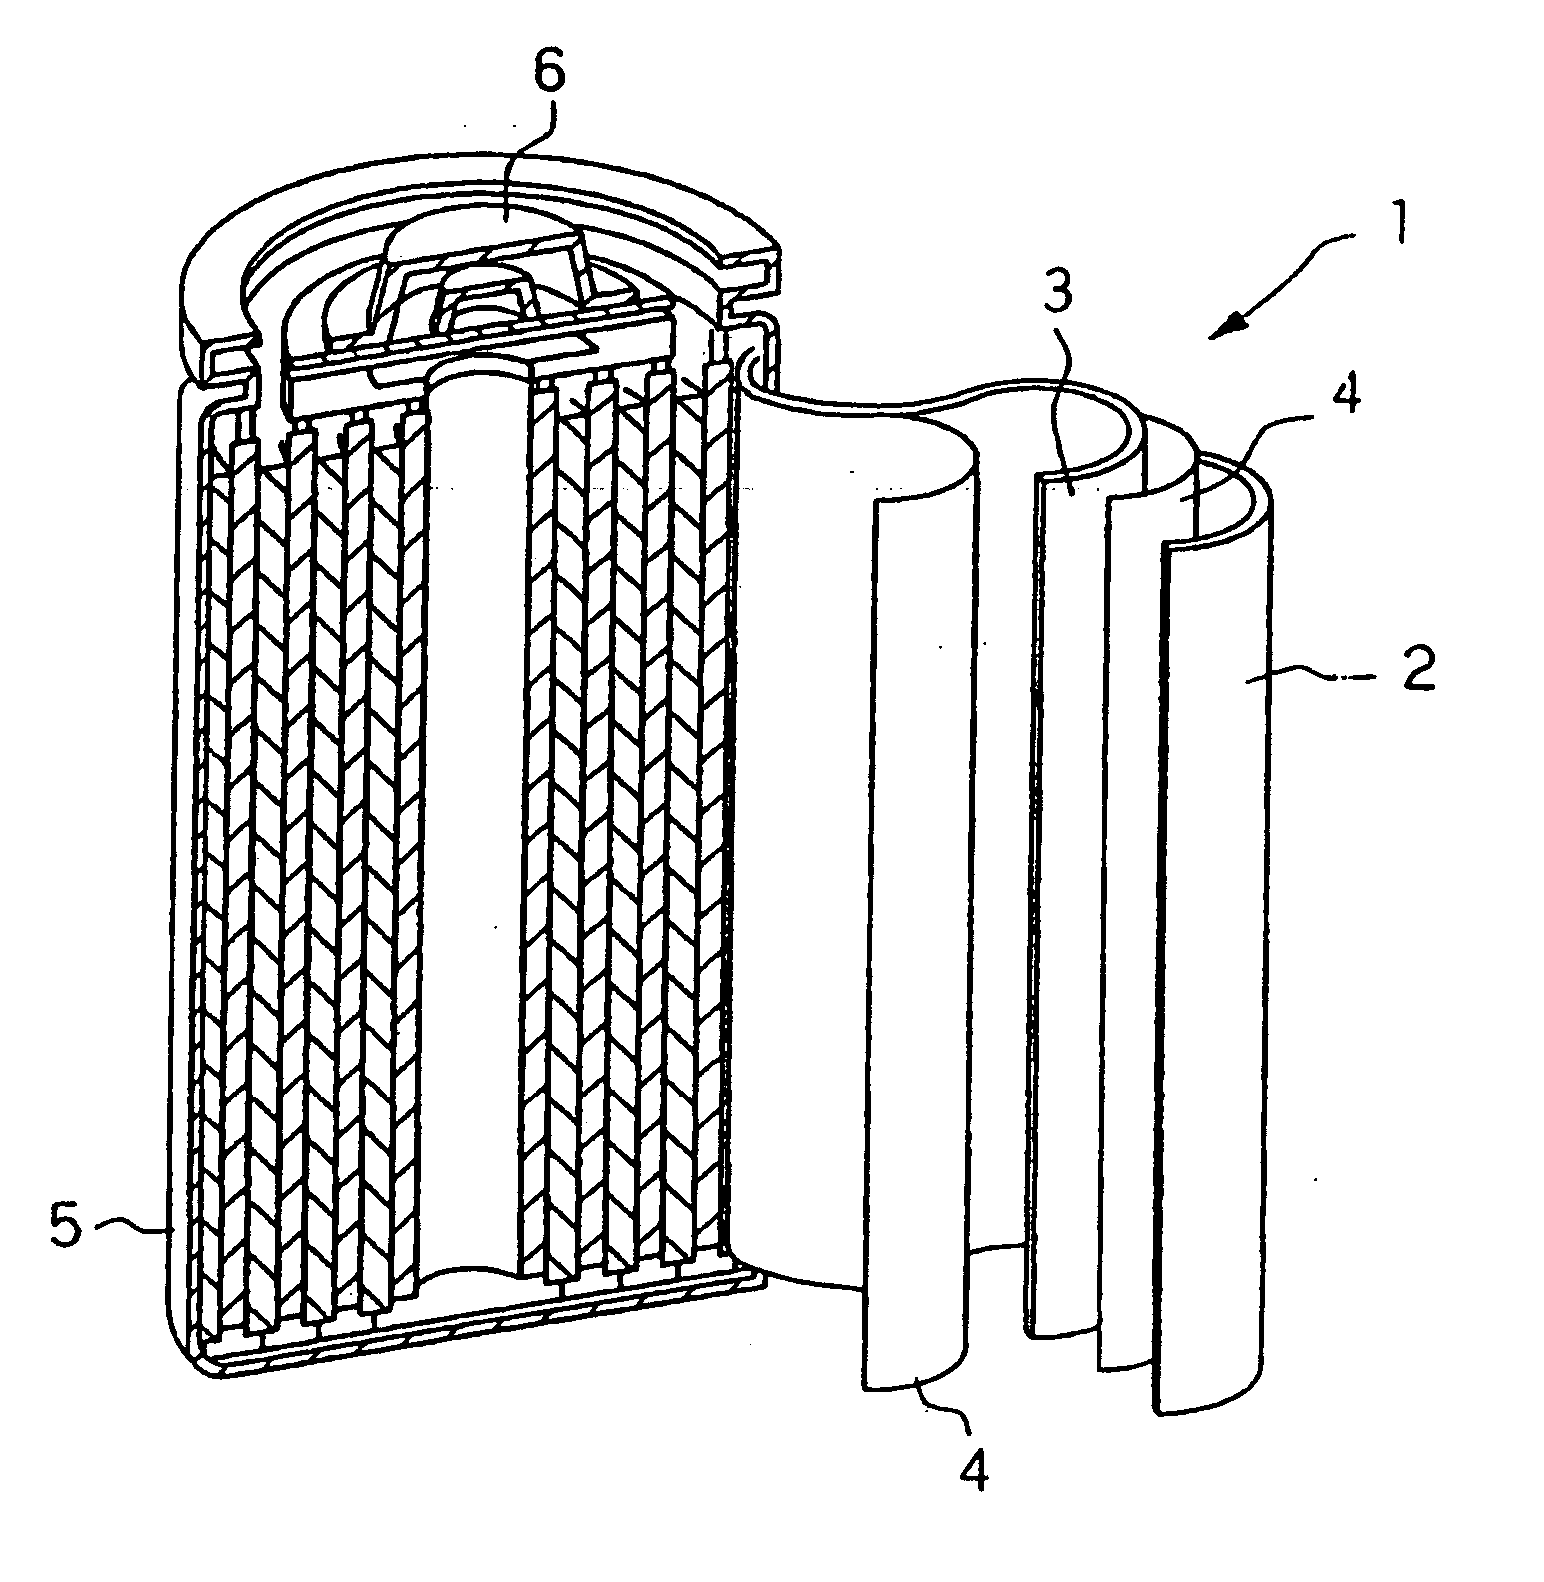 Anode and lithium battery including the anode